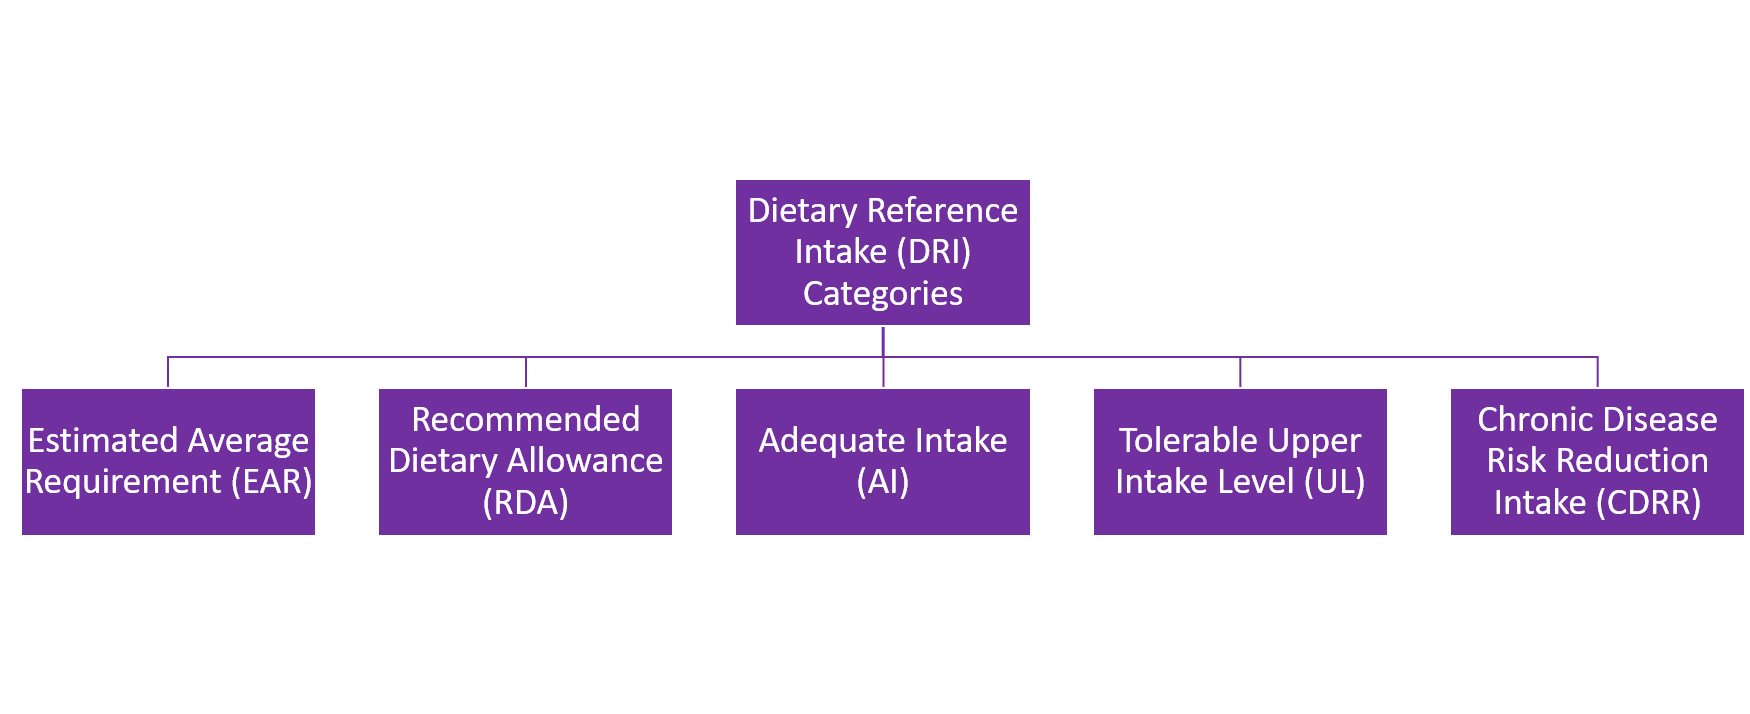 Image showing the five Dietary Reference Intake (DRI) categories: the Estimated Average Requirement (EAR), Recommended Dietary Allowance (RDA), Adequate Intake (AI), Tolerable Upper Intake Level (UL), and Chronic Disease Risk Reduction Intake (CDRR).